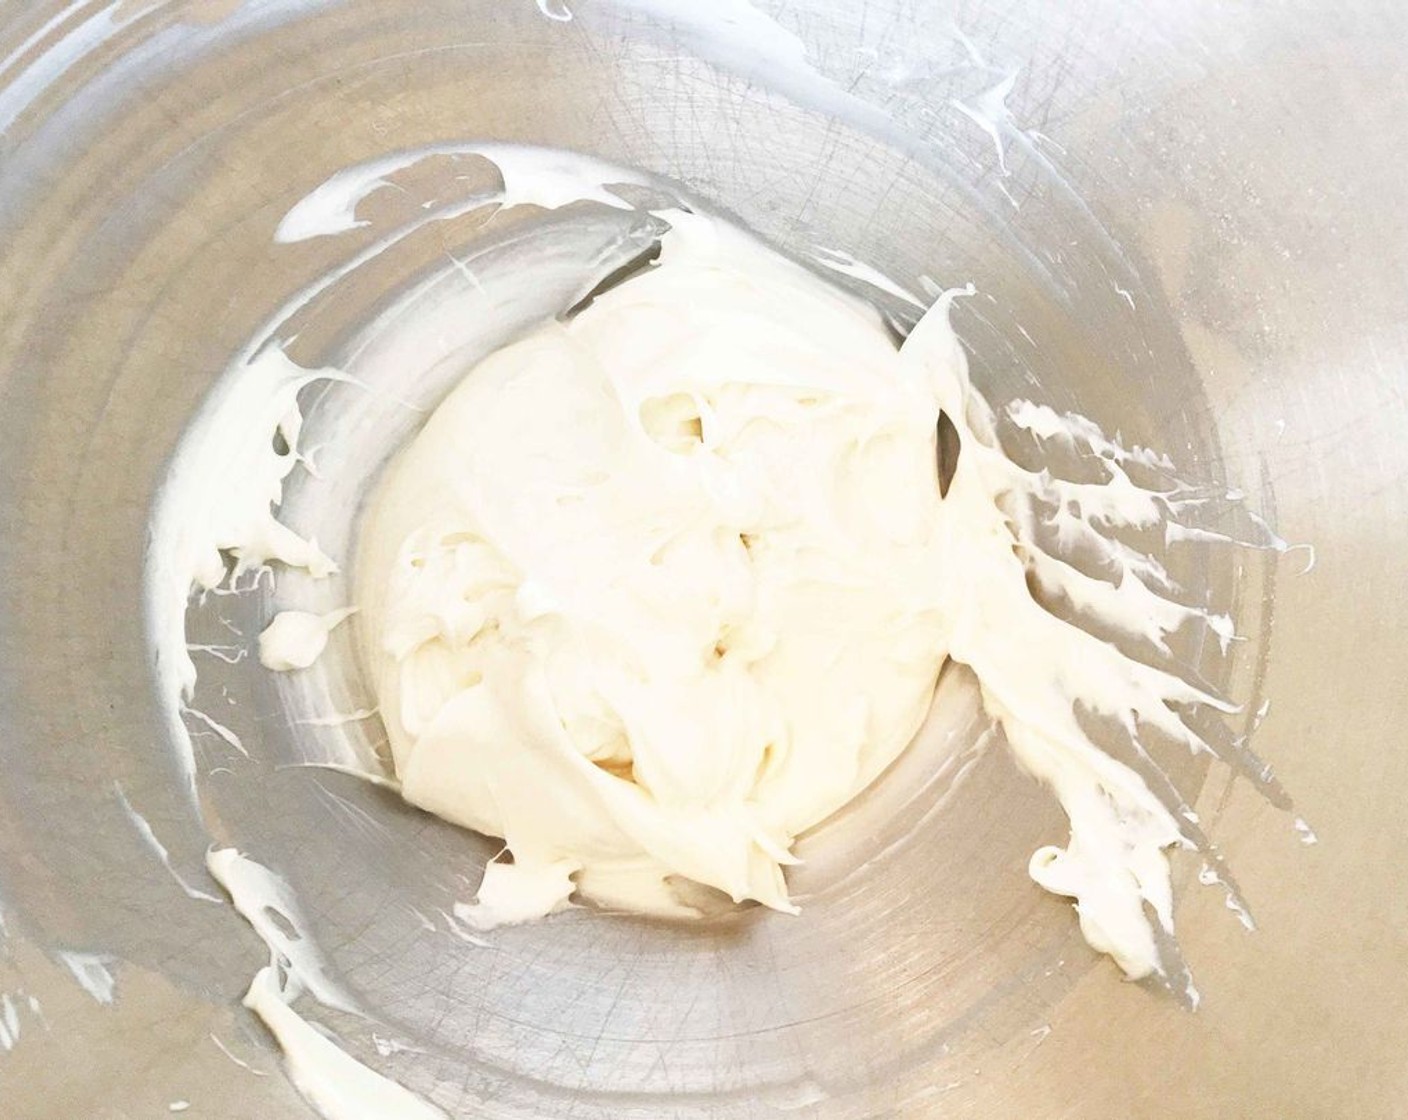 step 9 While the cake is cooling, beat together the Cream Cheese (1 cup), Powdered Confectioners Sugar (1/2 cup), Fat-Free Vanilla Greek Yogurt (1/3 cup), Swerve Confectioners Sugar Replacement (1/4 cup), and Vanilla Extract (1 tsp) until smooth and creamy.